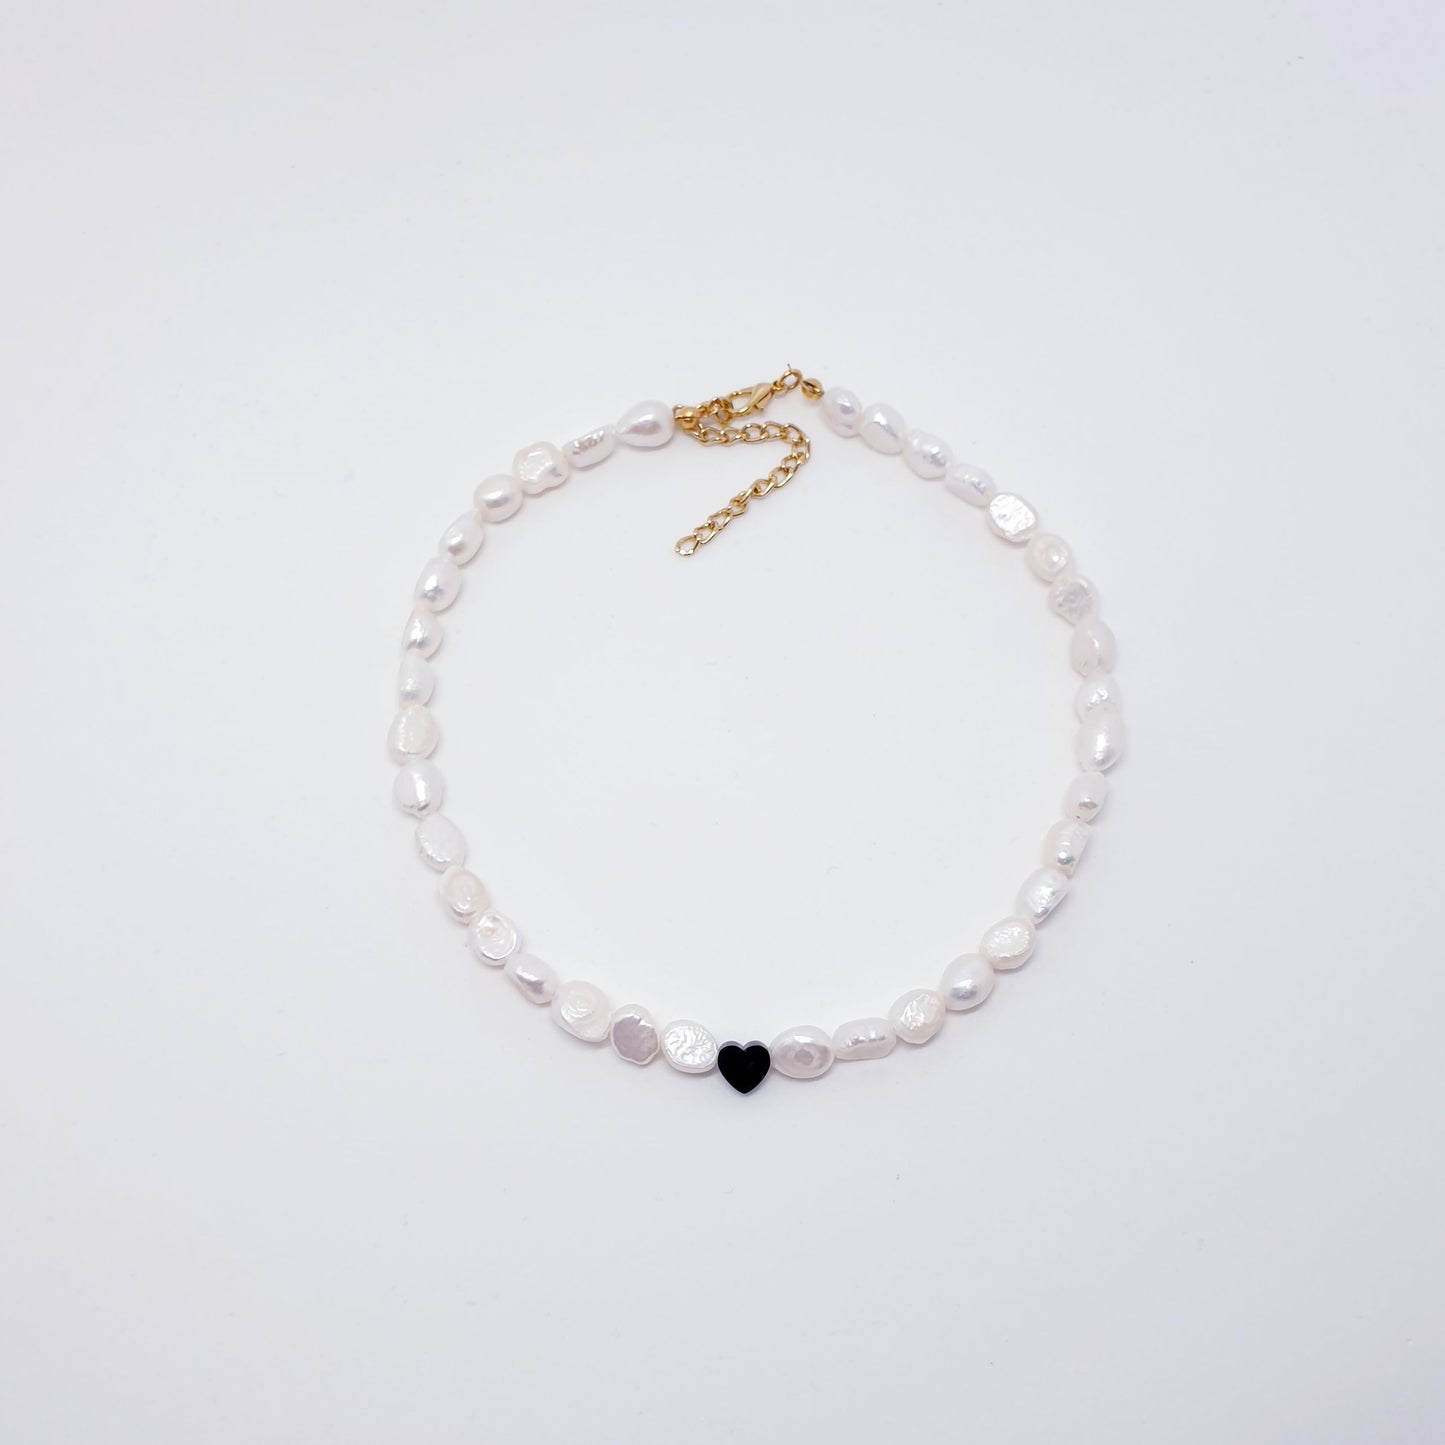 Freshwater Pearl Necklace with Black Heart Charm